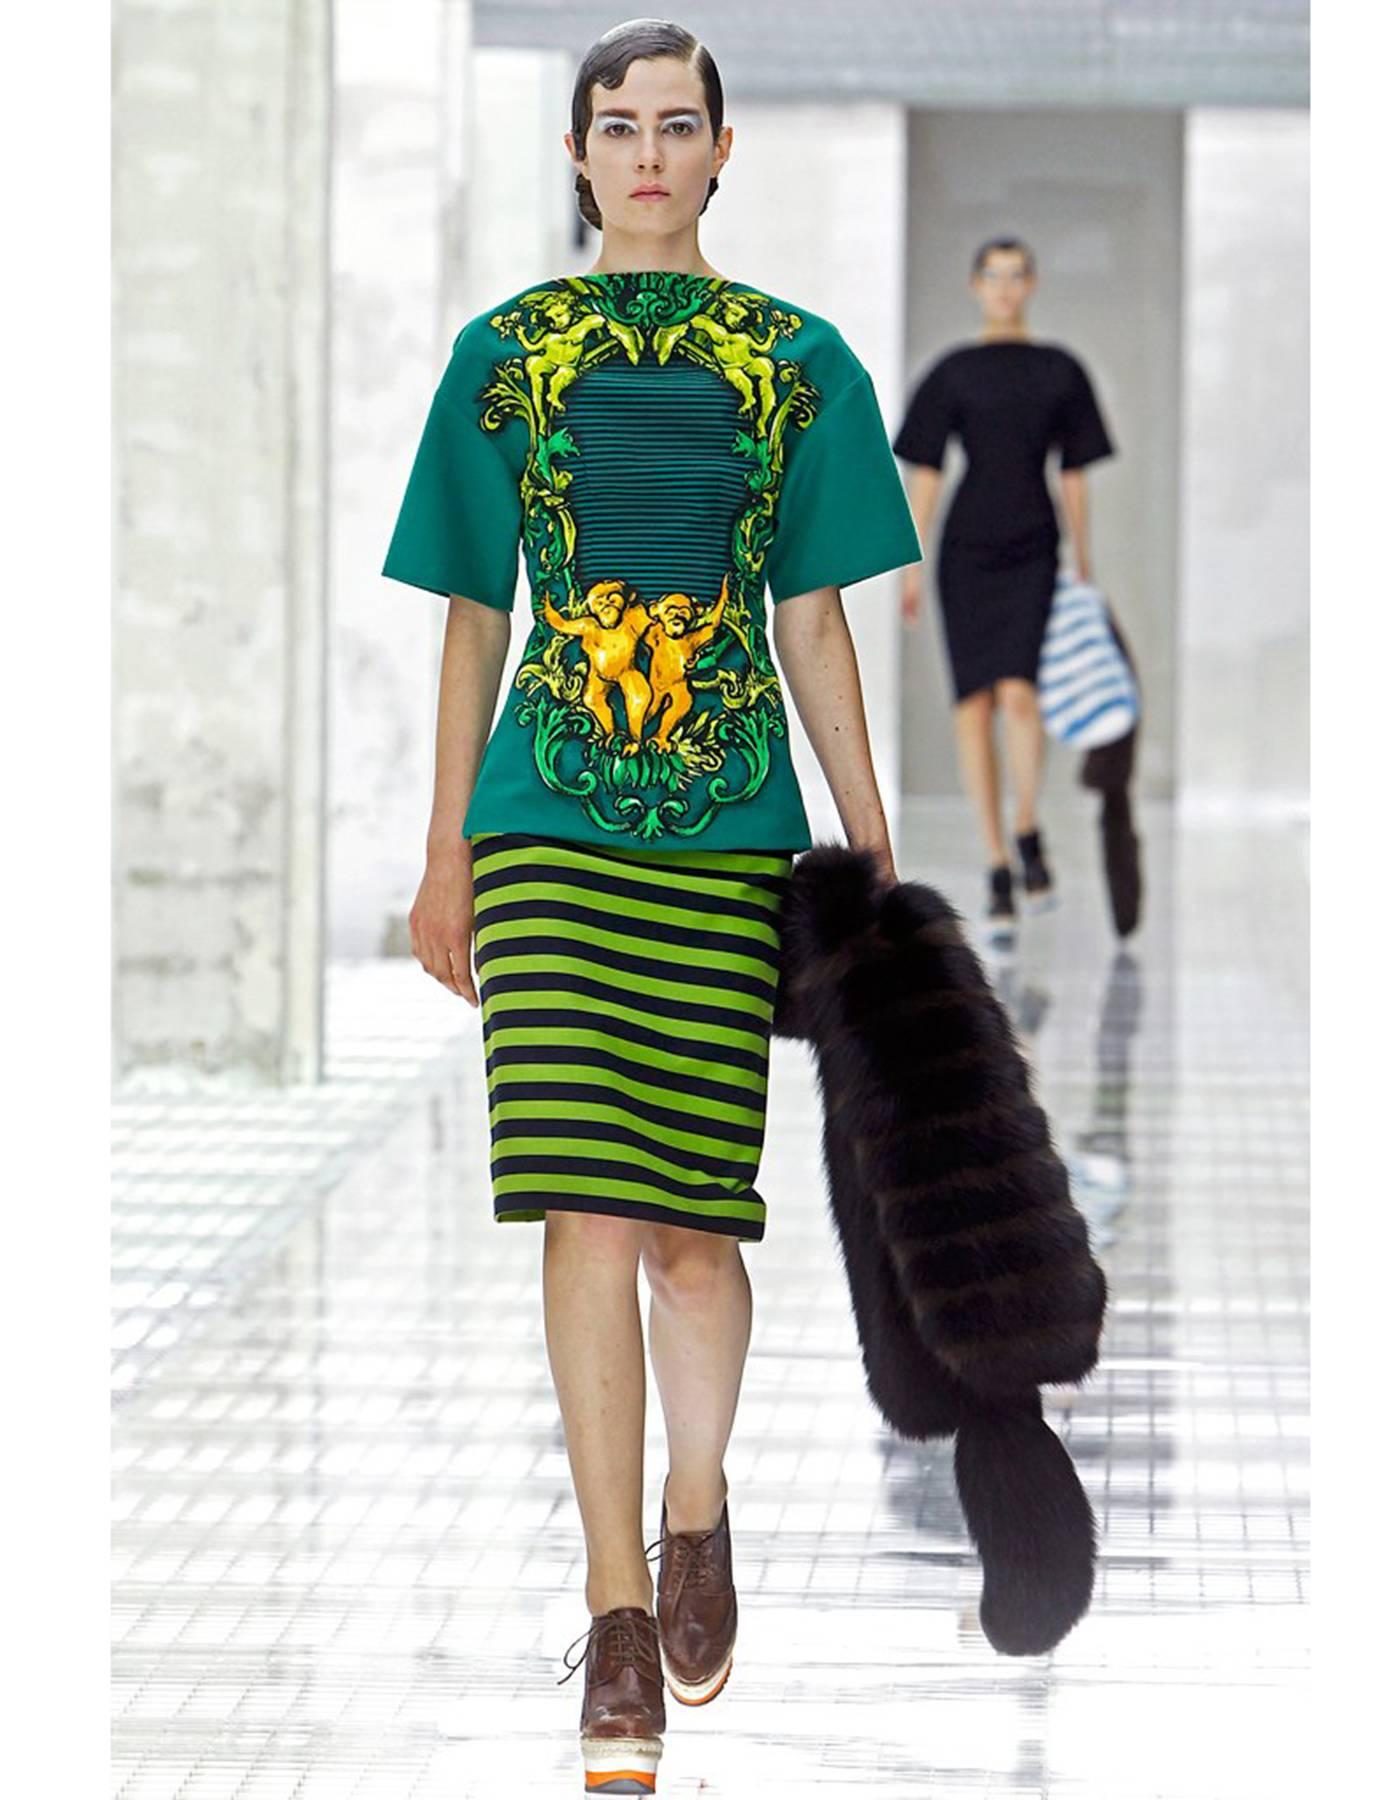 Prada S/S '11 Green Monkey Printed Cotton Tunic
Features stripes, cupid and monkey prints

Made In: Italy
Year of Production: 2011
Color: Black, green, yellow and orange
Composition: 98% cotton, 2% other fibers
Lining: Black, 74% cupro, 26%